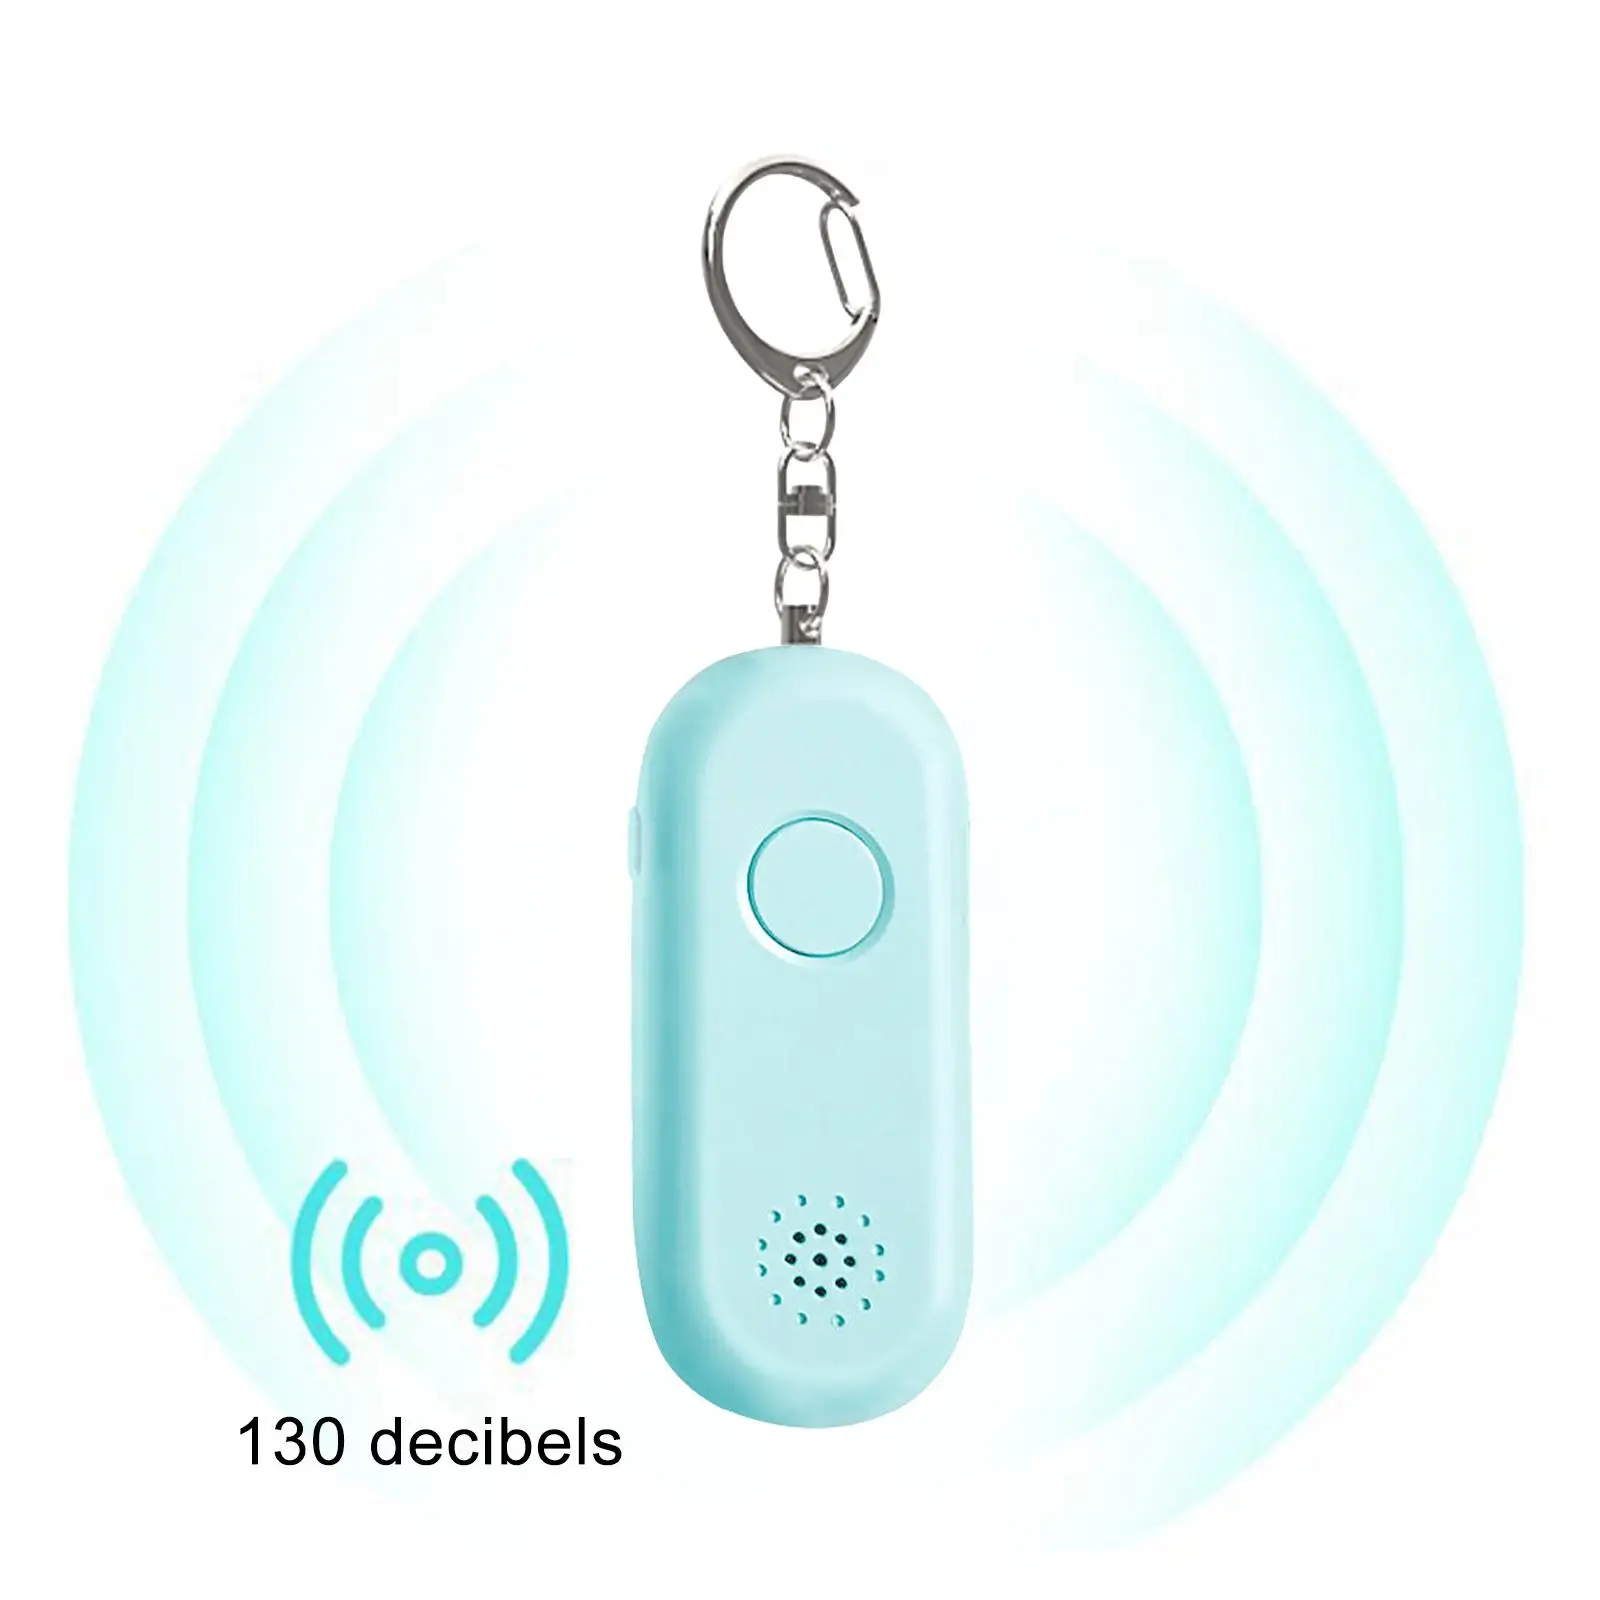 Mini Alarm Keychain Personal Safety Protective Rechargeable Security Alarm for Backpacking Travelling Elderly Emergency Girls